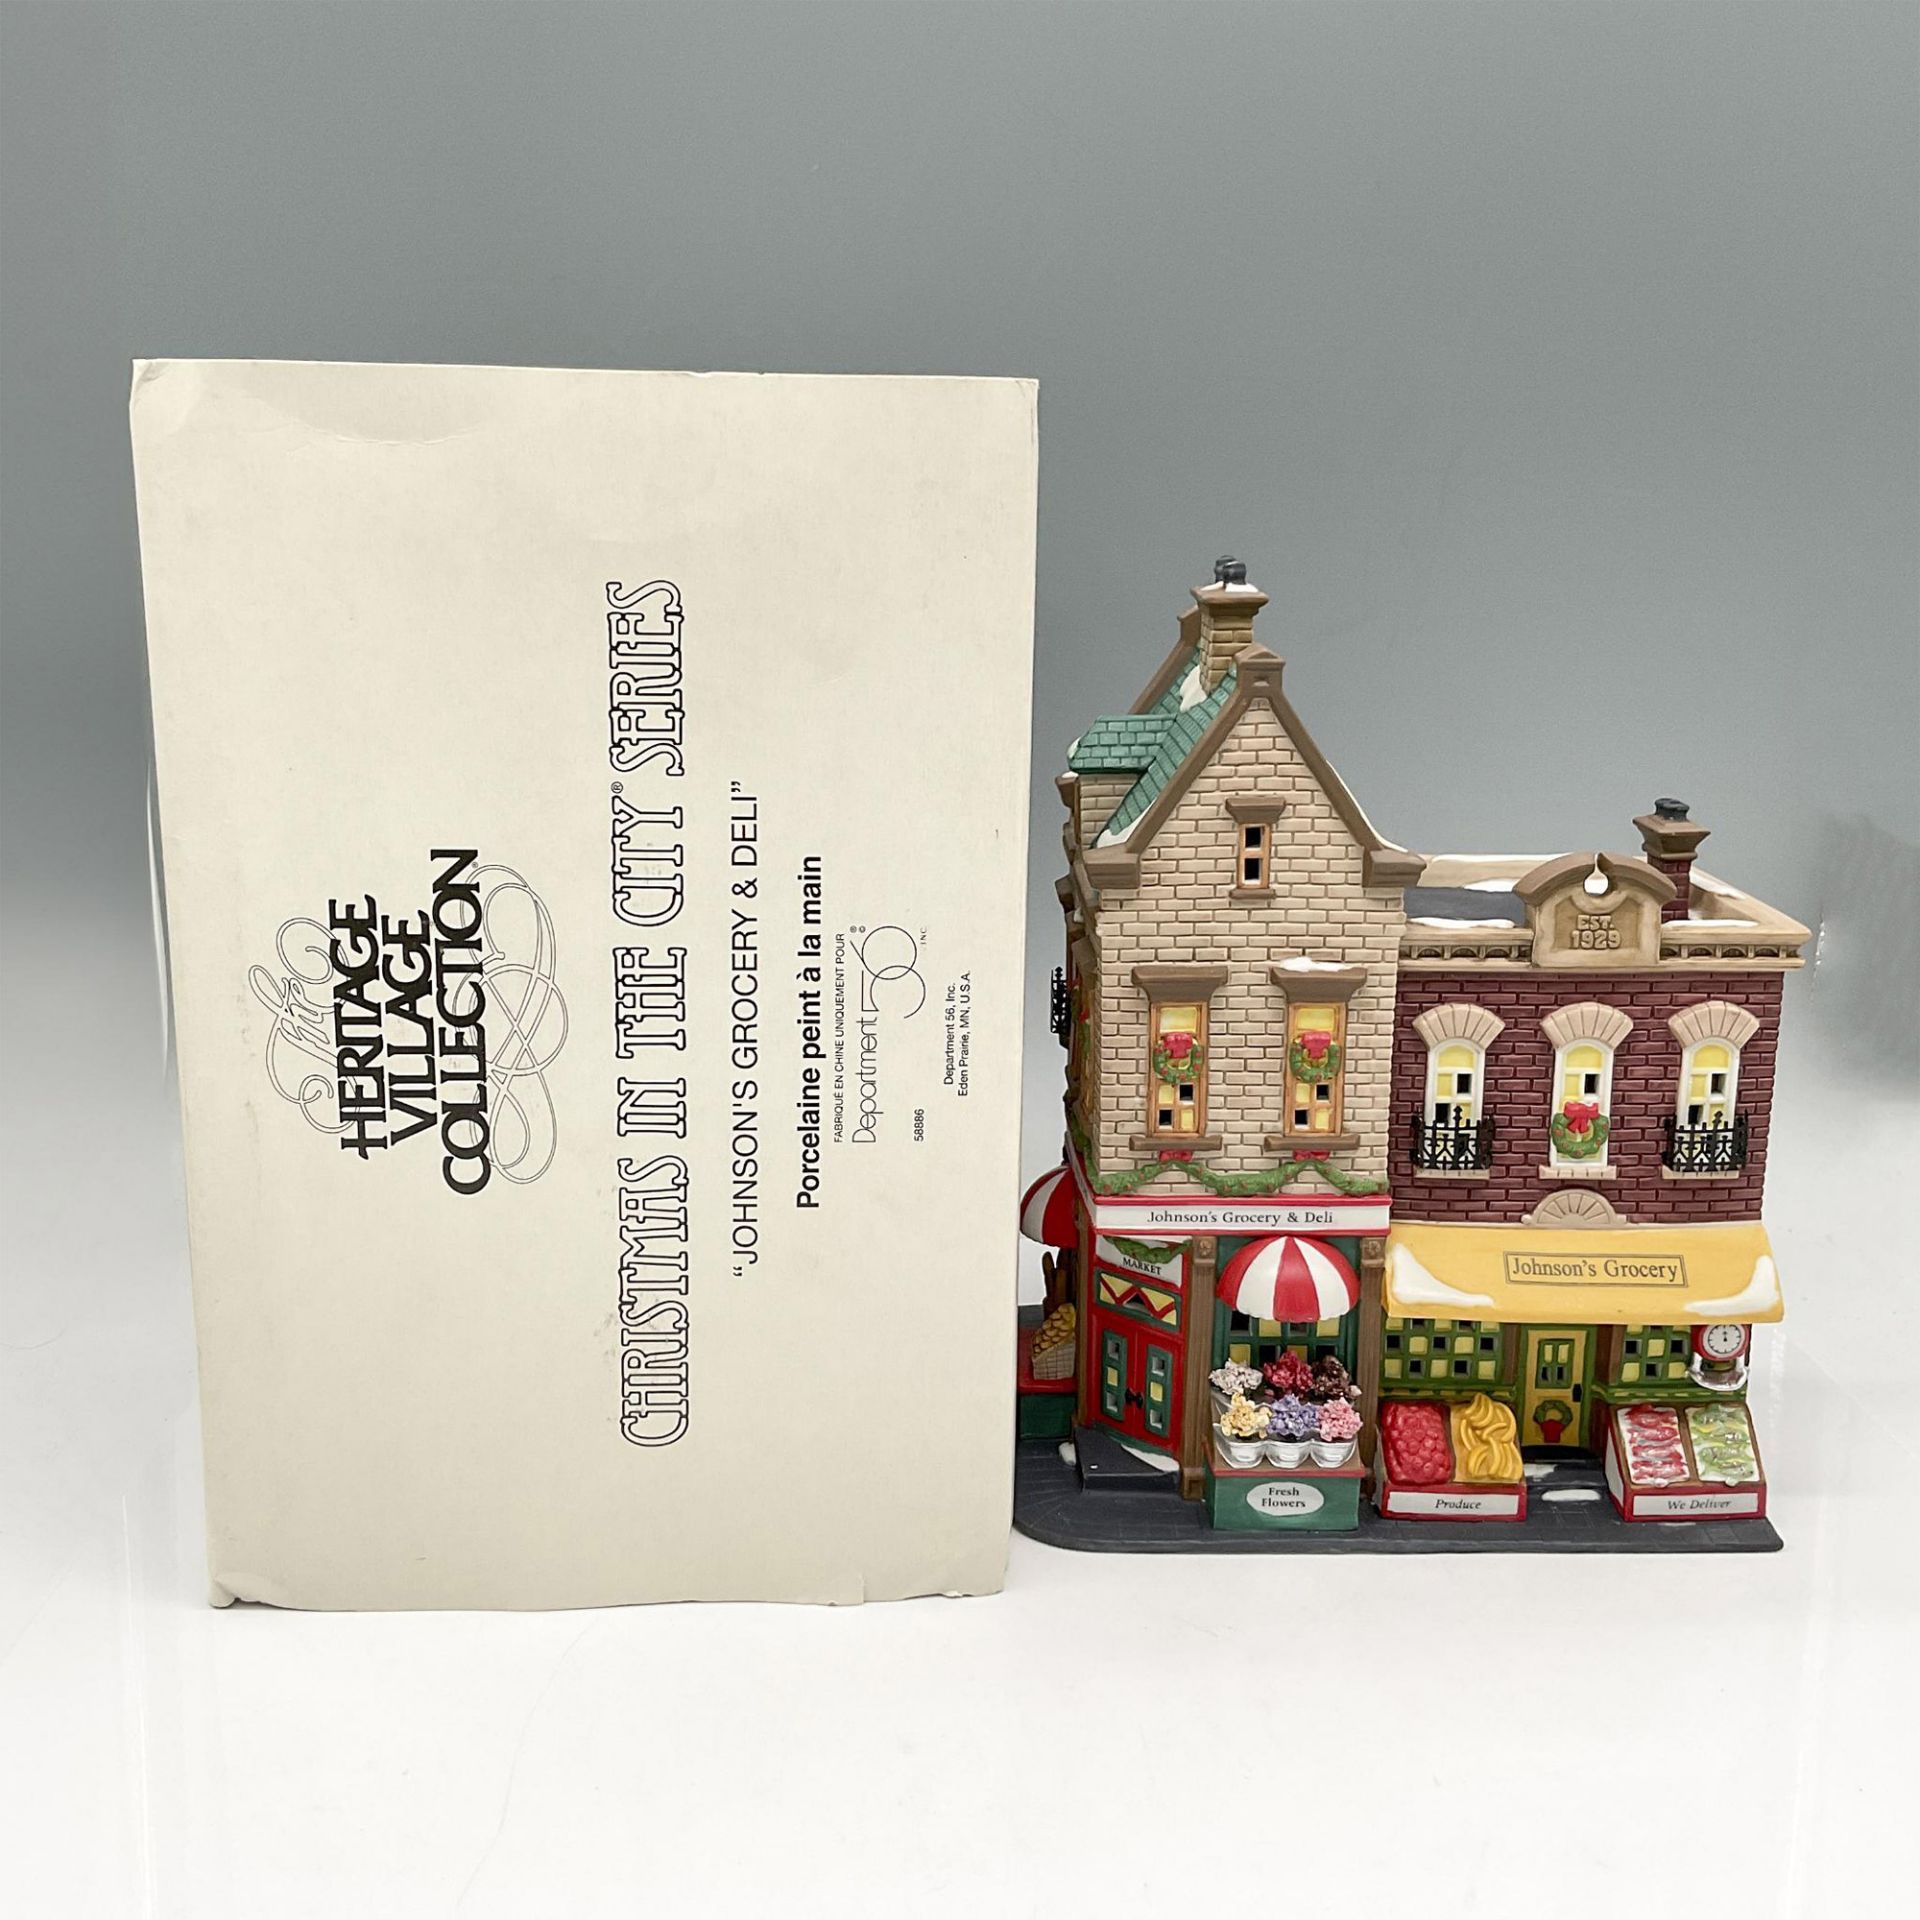 Department 56 Porcelain Christmas In The City, Johnson's Grocery - Image 5 of 5